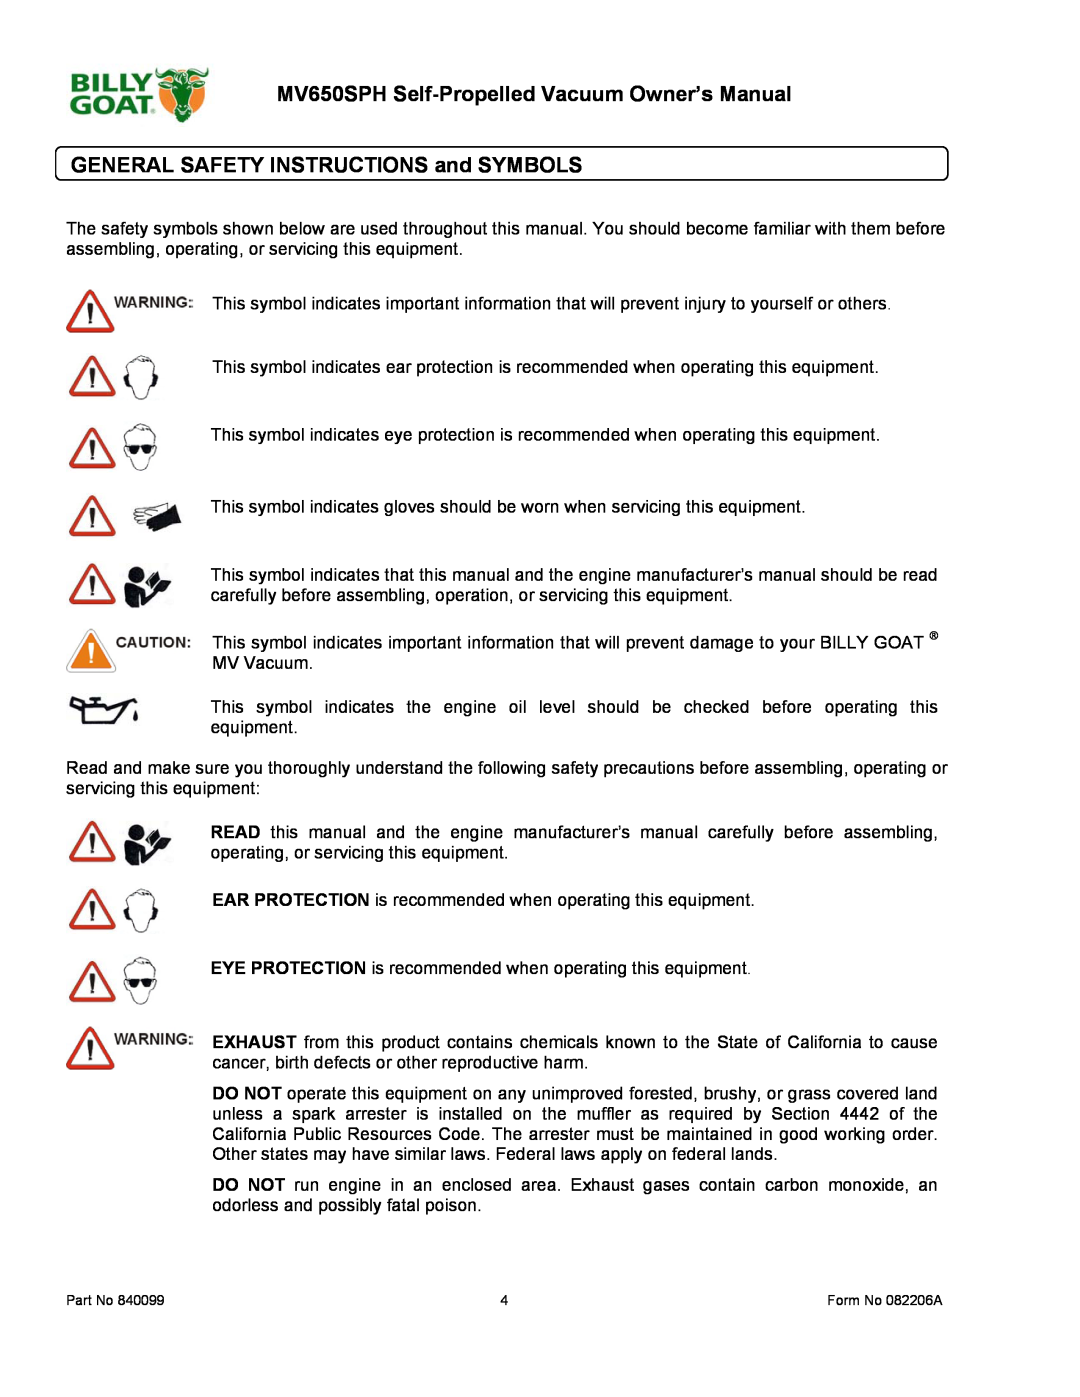 Billy Goat MV650SPH owner manual GENERAL SAFETY INSTRUCTIONS and SYMBOLS 